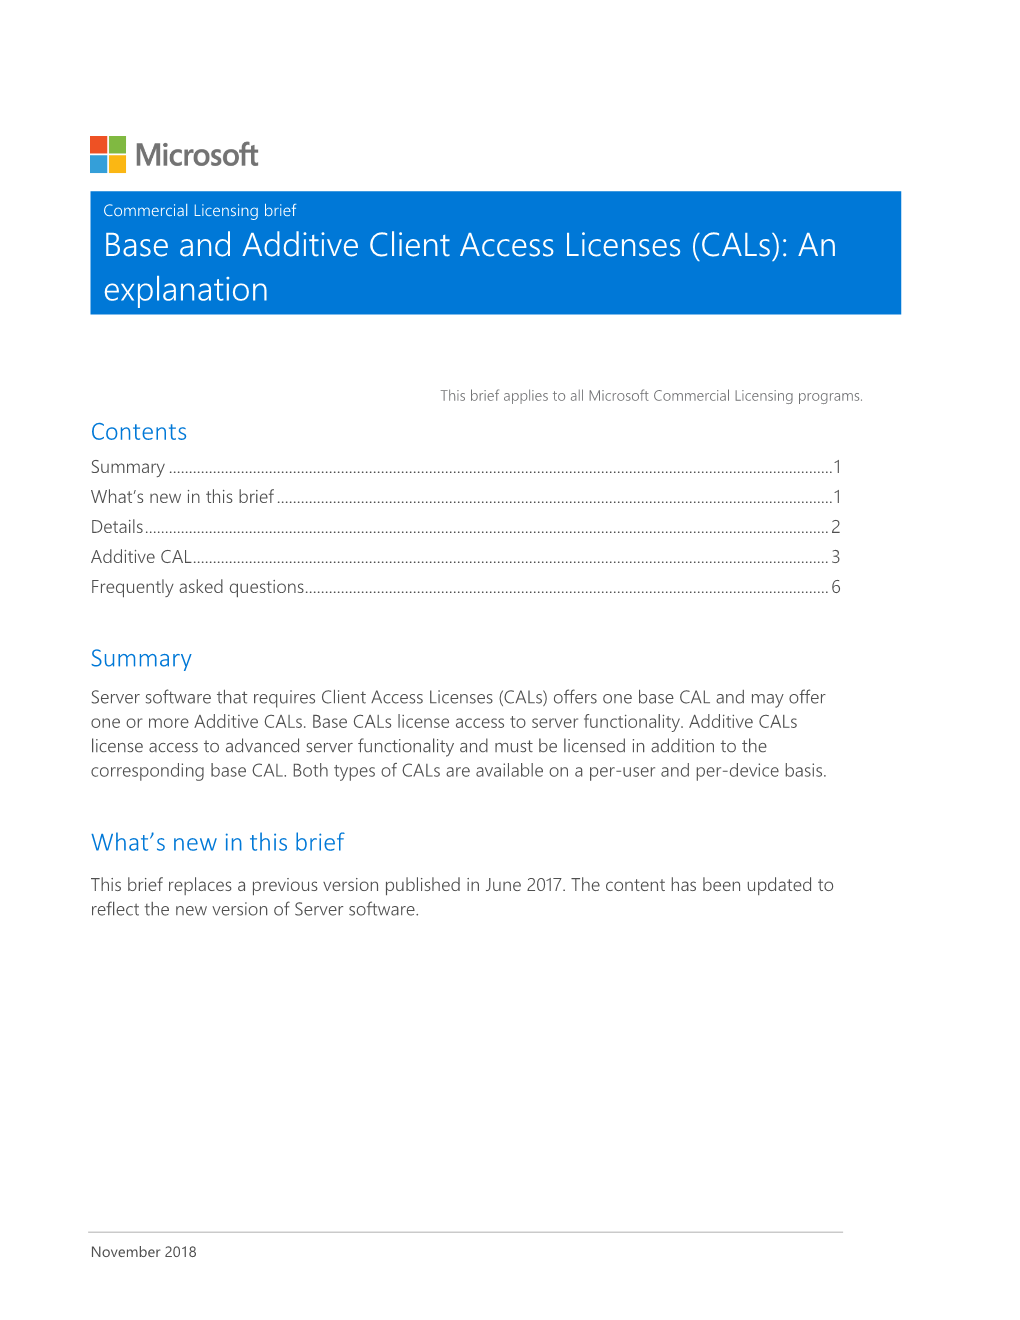 Base and Additive Client Access Licenses (Cals): an Explanation